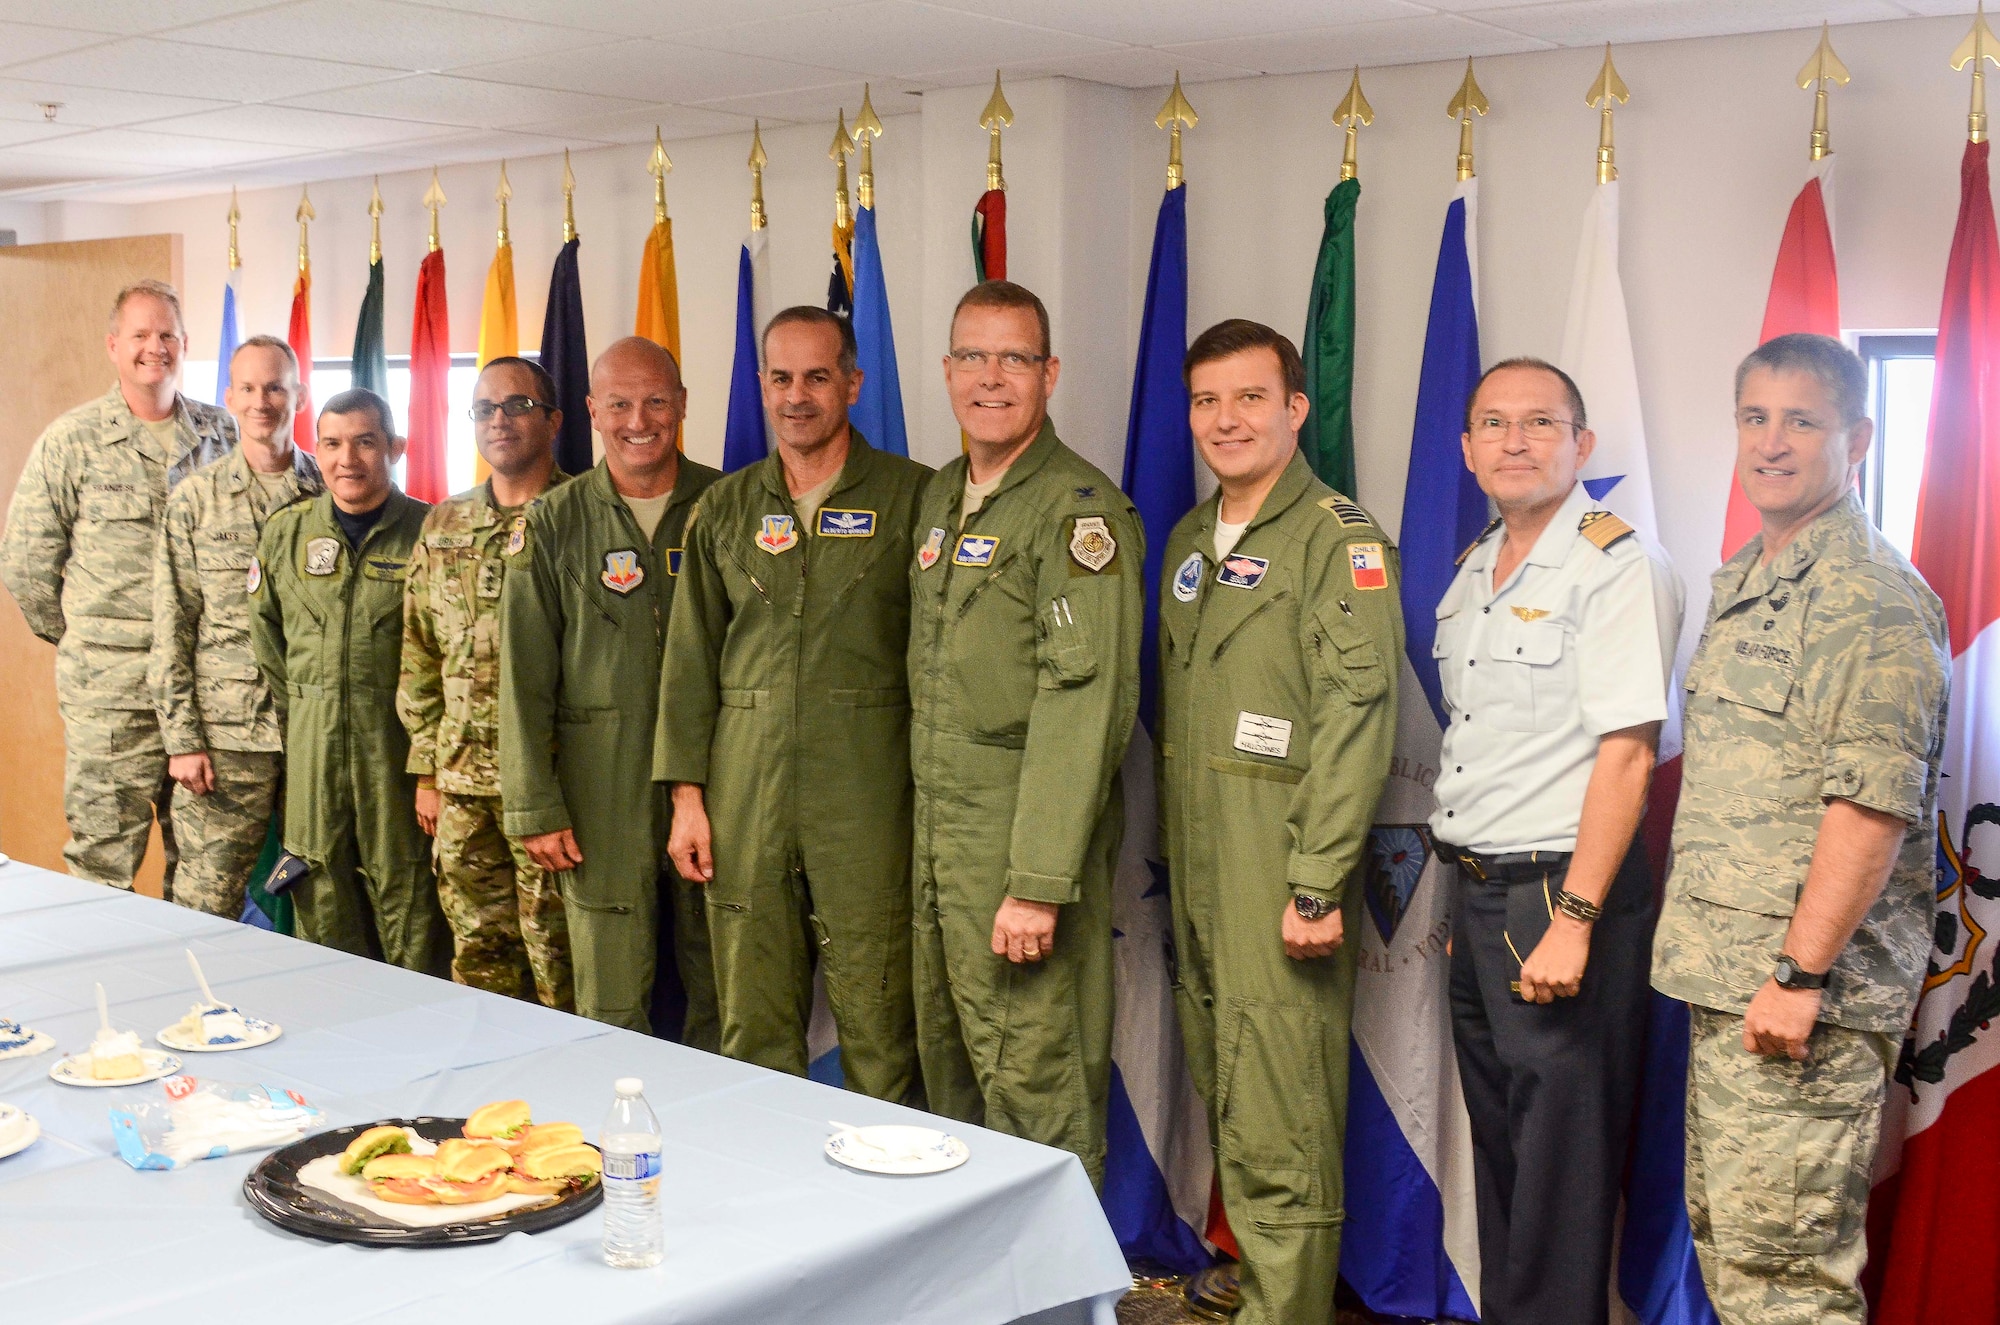 Members from 12th Air Force (Air Forces Southern) and gather for a photo during the 53rd Anniversary of the System of Cooperation Among American Air Forces (SICOFAA) at Davis-Monthan Air Force Base, Ariz., Apr. 16, 2014.  SICOFAA is the system that puts action to CONJEFAMER, a secretariat. The permanent secretariat was started in 1965 and since then the U.S. Air Force has hosted it, although it can be hosted by any nation. Every four to five years it comes up for renewal. Currently, the deputy secretary general position rotates amongst the other 20 Air Forces for two year tours in alphabetical order of the country they represent.  (U.S. Air Force photo by Staff Sgt. Adam Grant/Released)